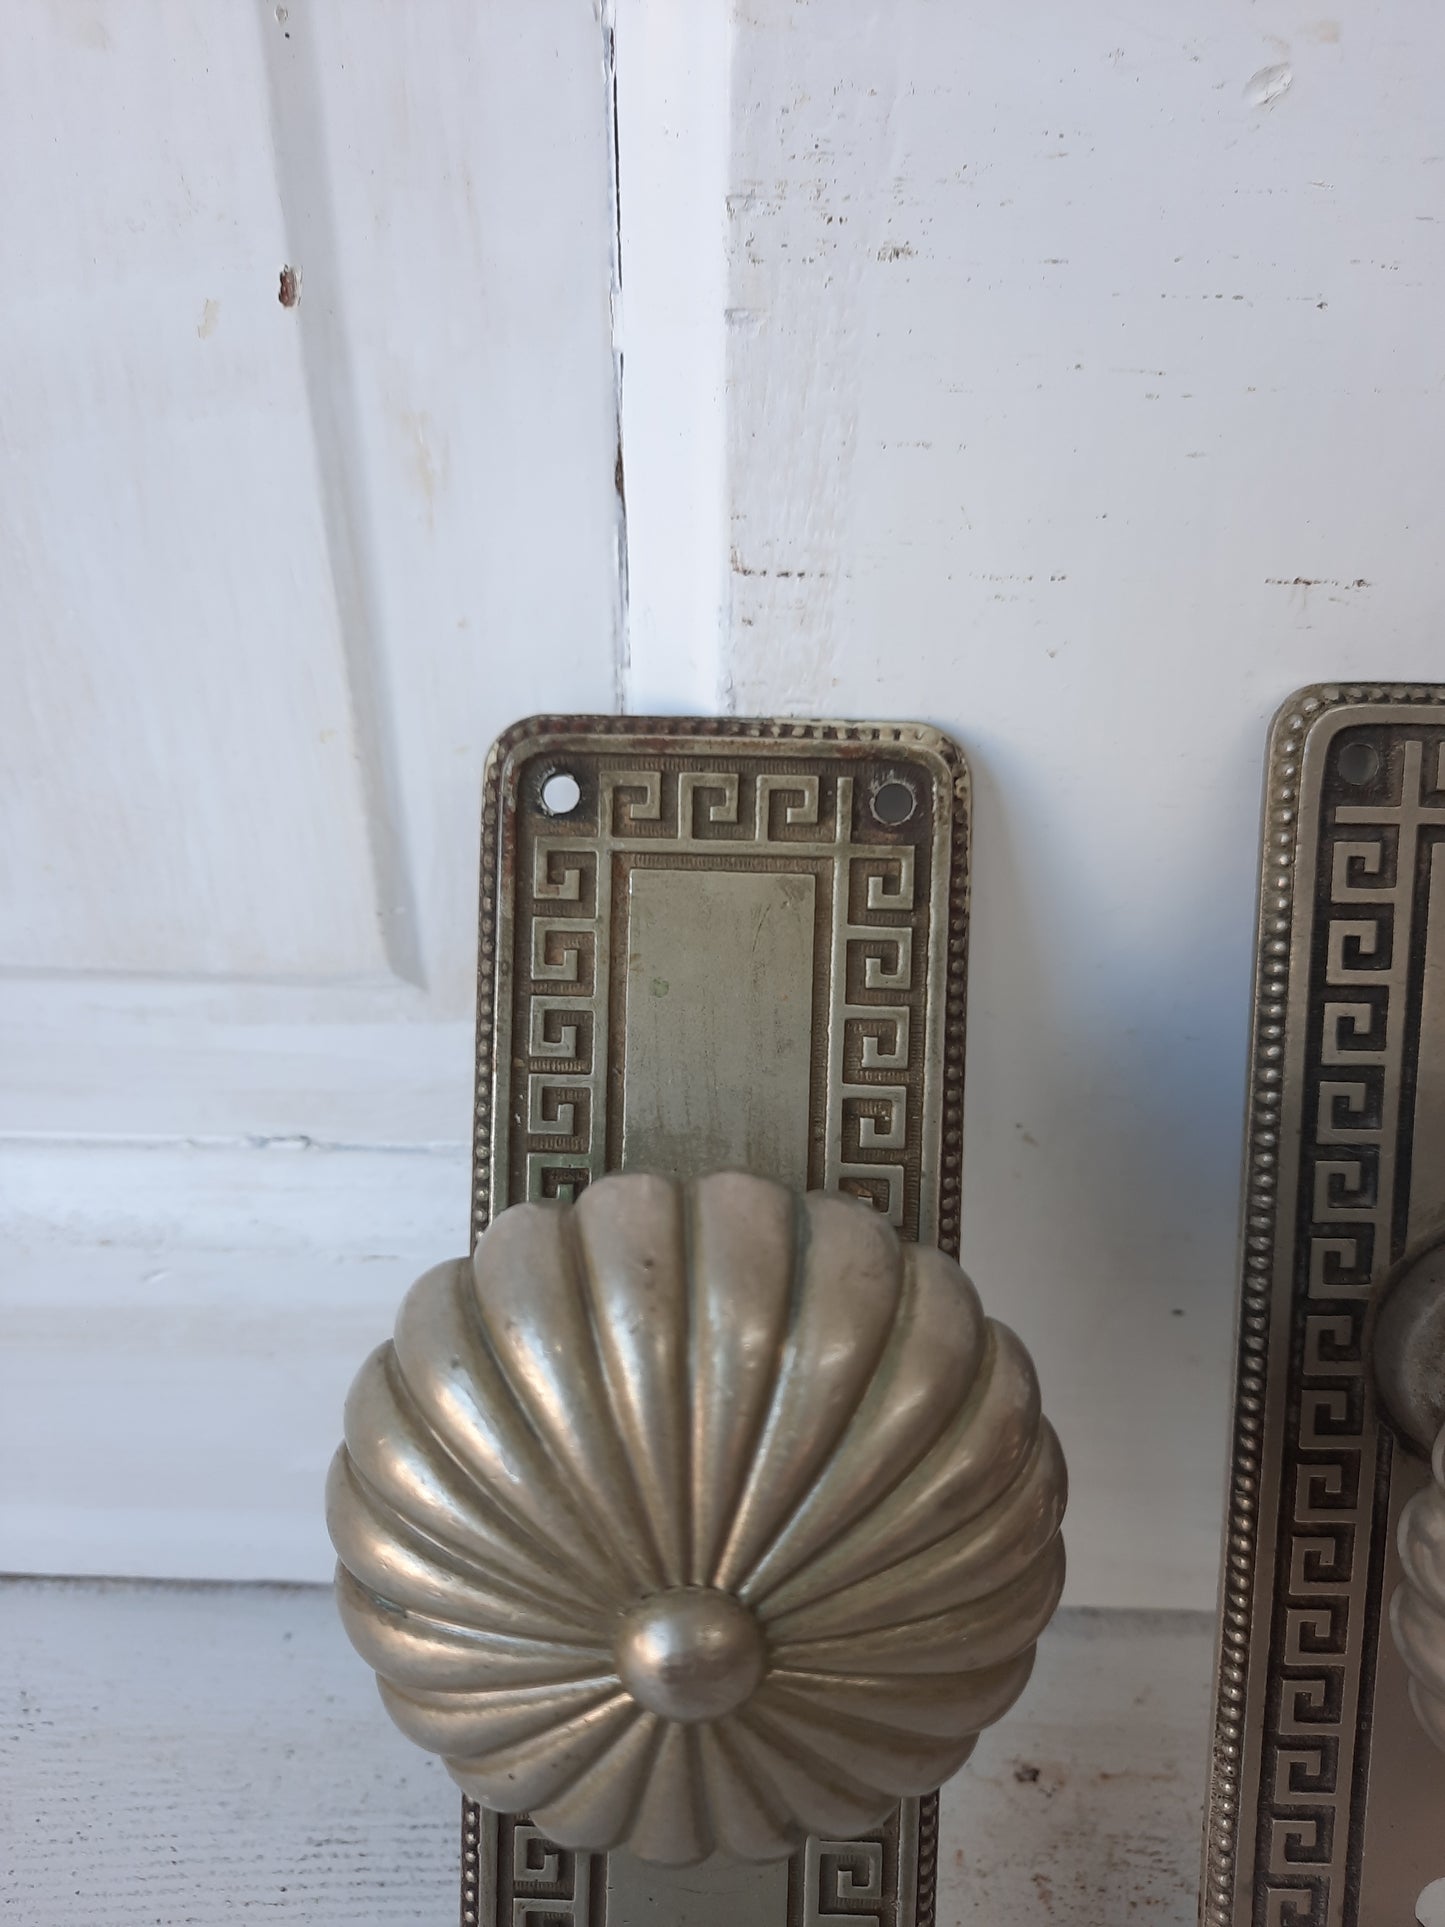 Yale Silver Antique Door Hardware Set with Greek Key Design, Silver Knobs and Plates Radial Design